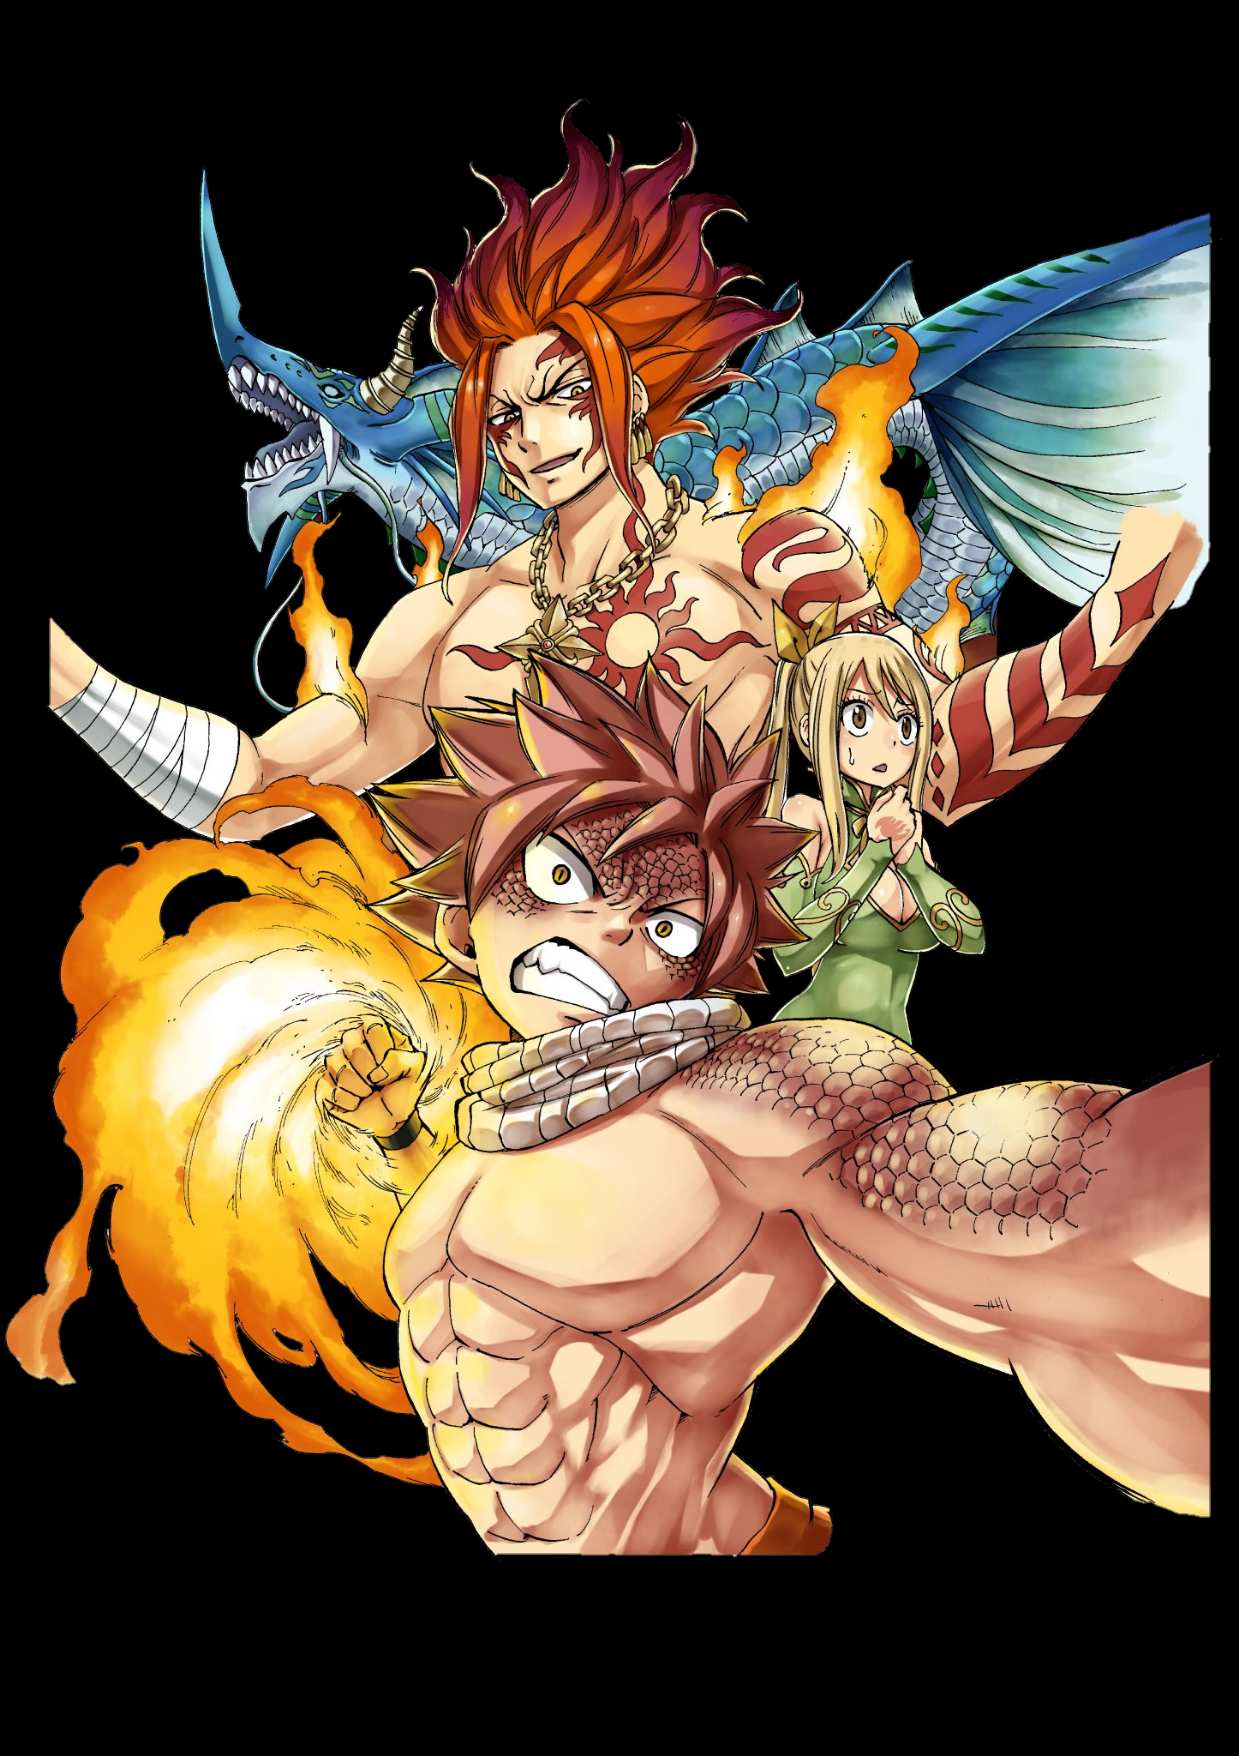 Fairy Tail Hundred Year Quest Discussion Thread 7 | VS Battles Wiki Forum